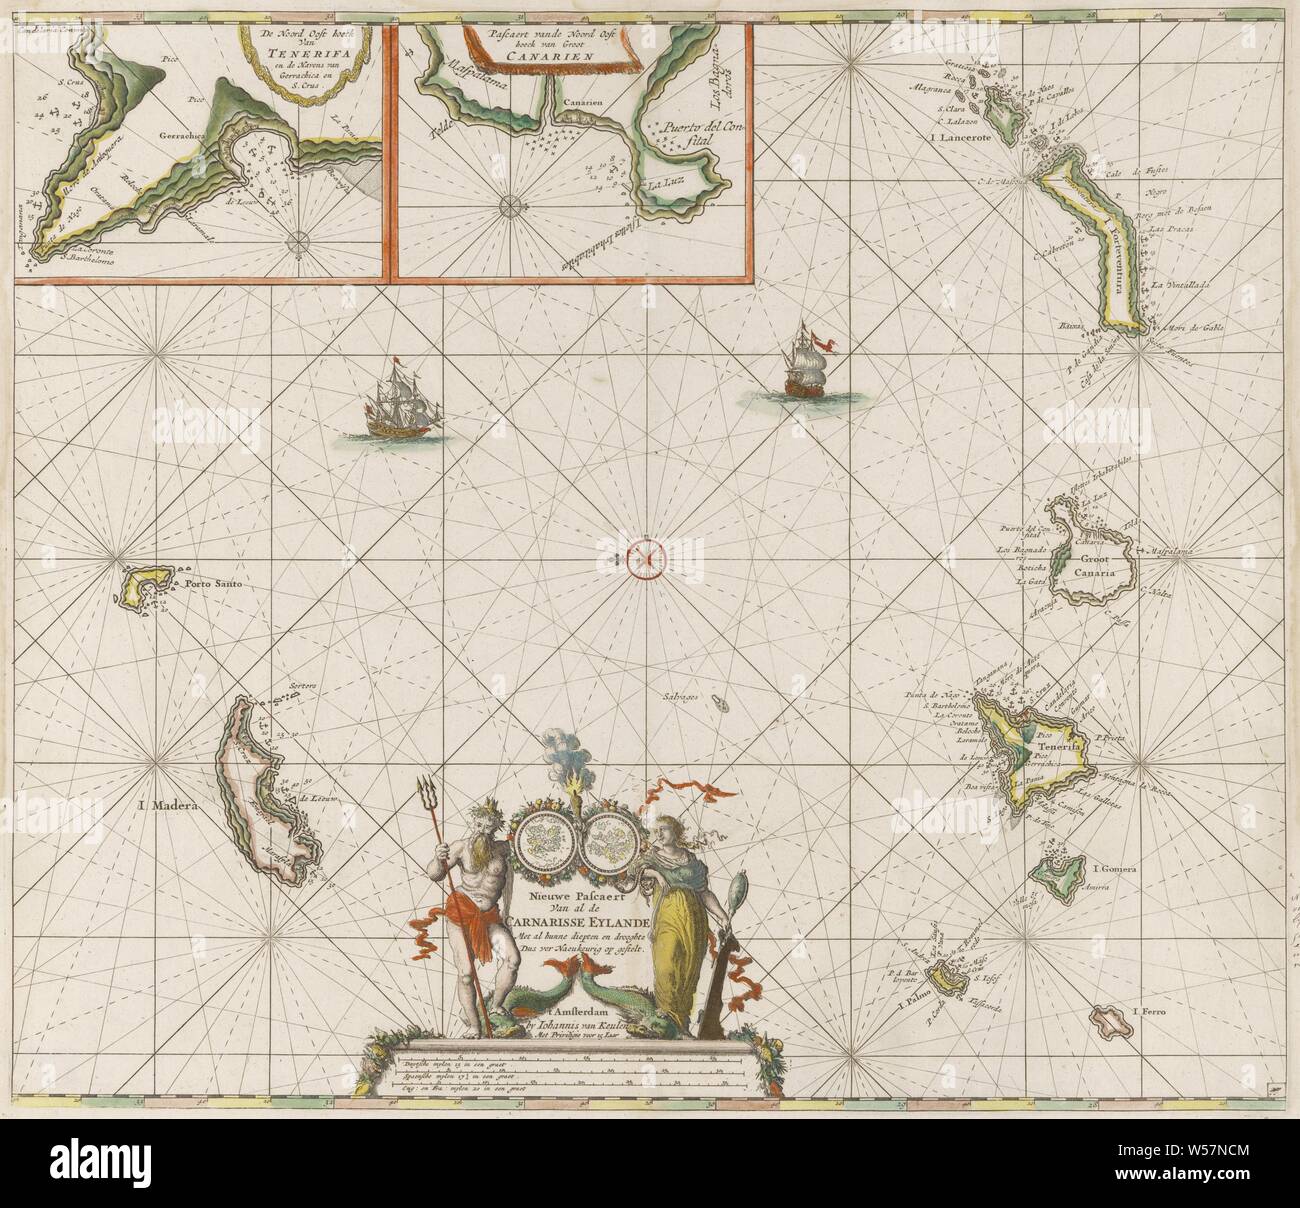 Passport map of the Canary Islands New Pascaert of all the Carnarisse Eylande (title on object), Maritime map of the Canary Islands. With a compass rose, the North is on the left. Above detailed maps of parts of the coast of Tenerife and Gran Canaria. At the bottom of the title, flanked by Triton and the personification of Caution. Under the title the scale in German, Spanish and English or French miles, sailing-ship, sailing-boat, maps of separate countries or regions, fishes, (story of) Triton, Prudentia (Prudence) as Roman personification, Canary Islands, Jan Luyken, Amsterdam, c. 1680 Stock Photo